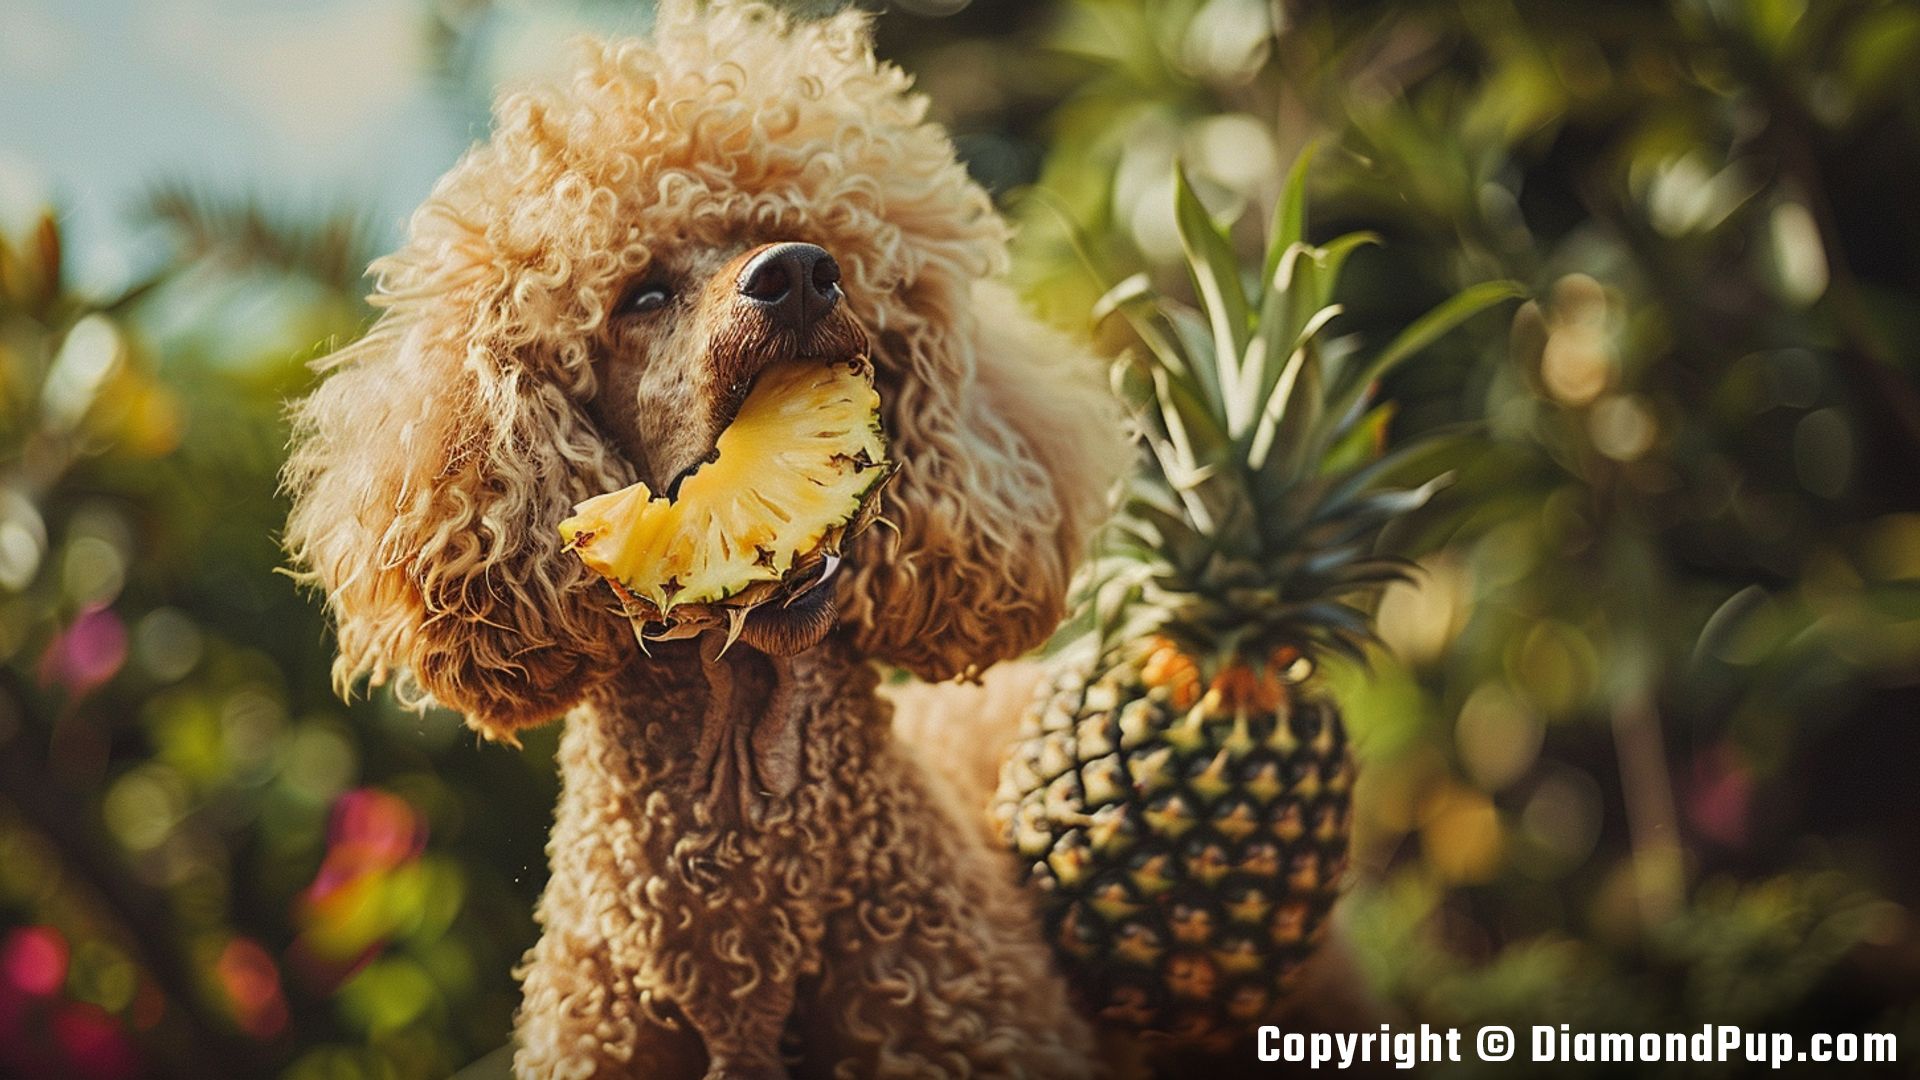 Image of a Happy Poodle Eating Pineapple